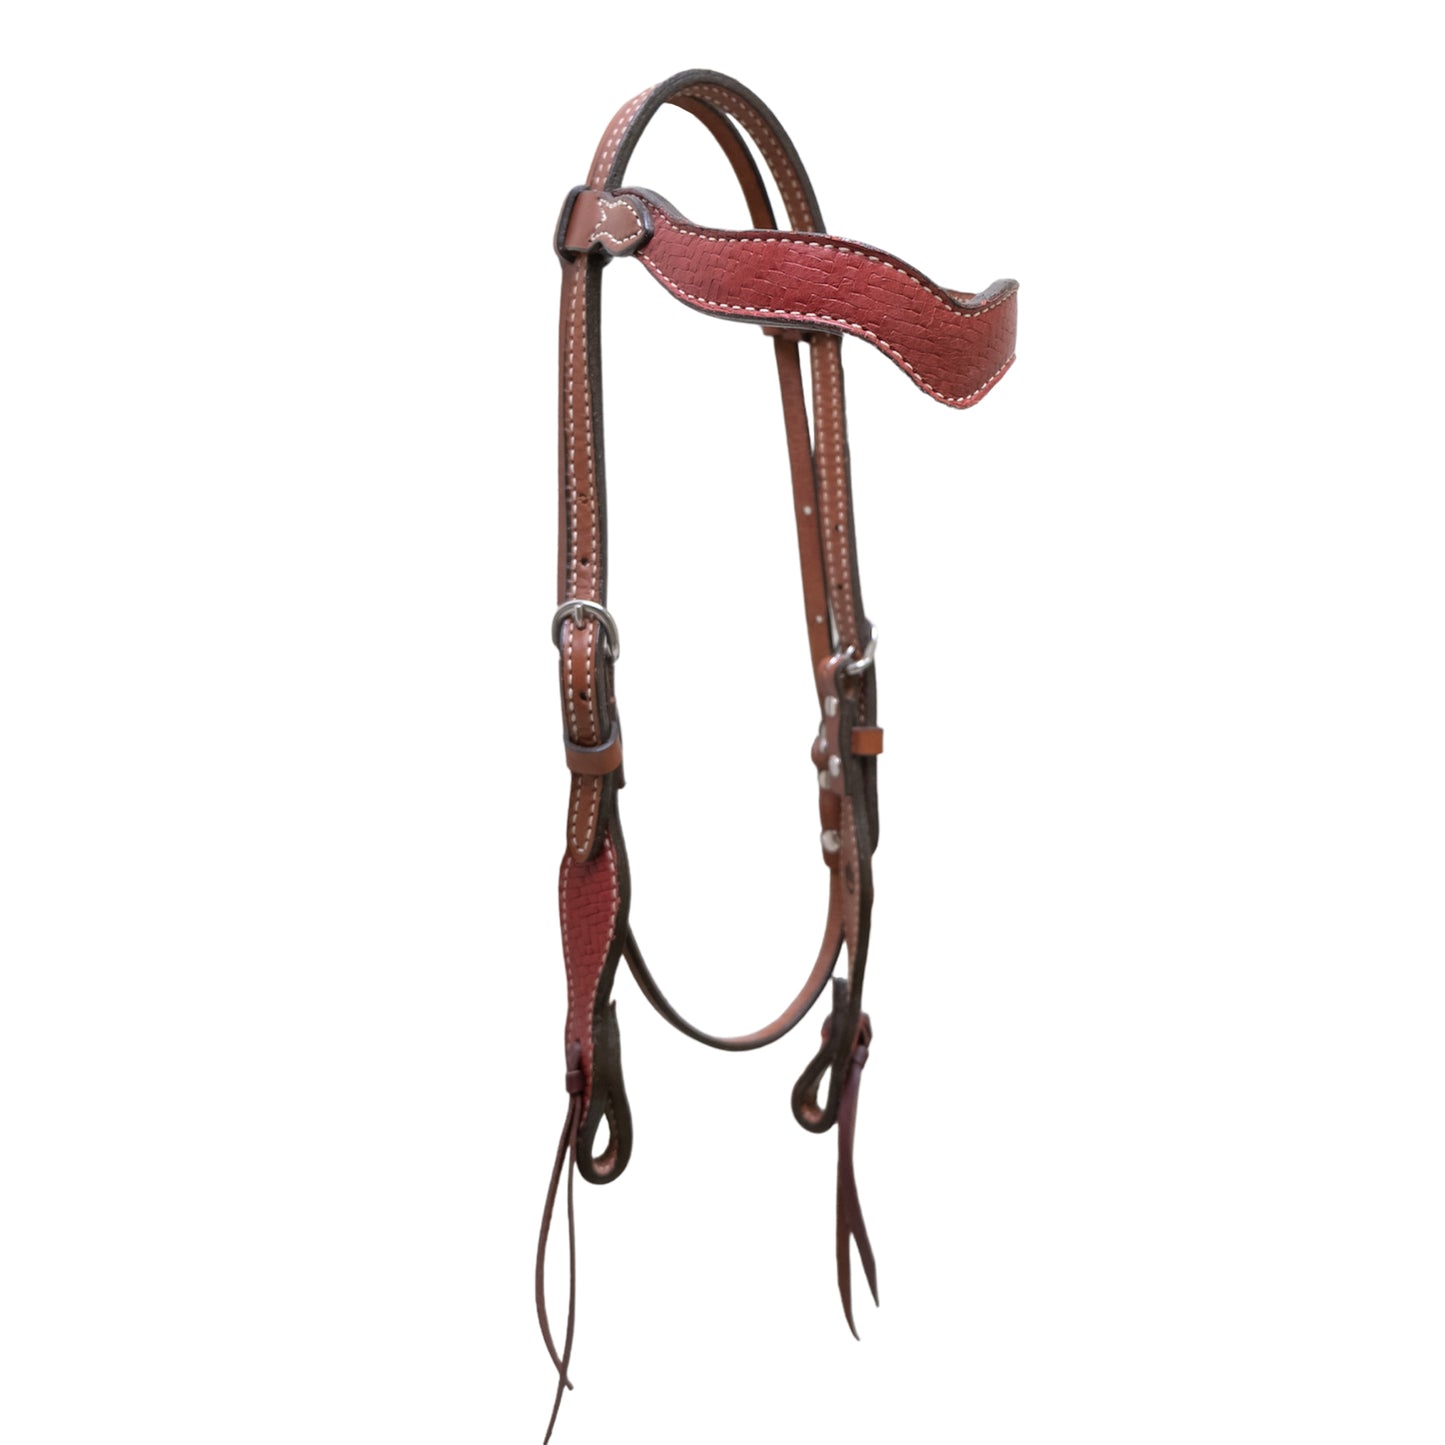 1-1/2" Wave browband headstall toast leather weave overlay.